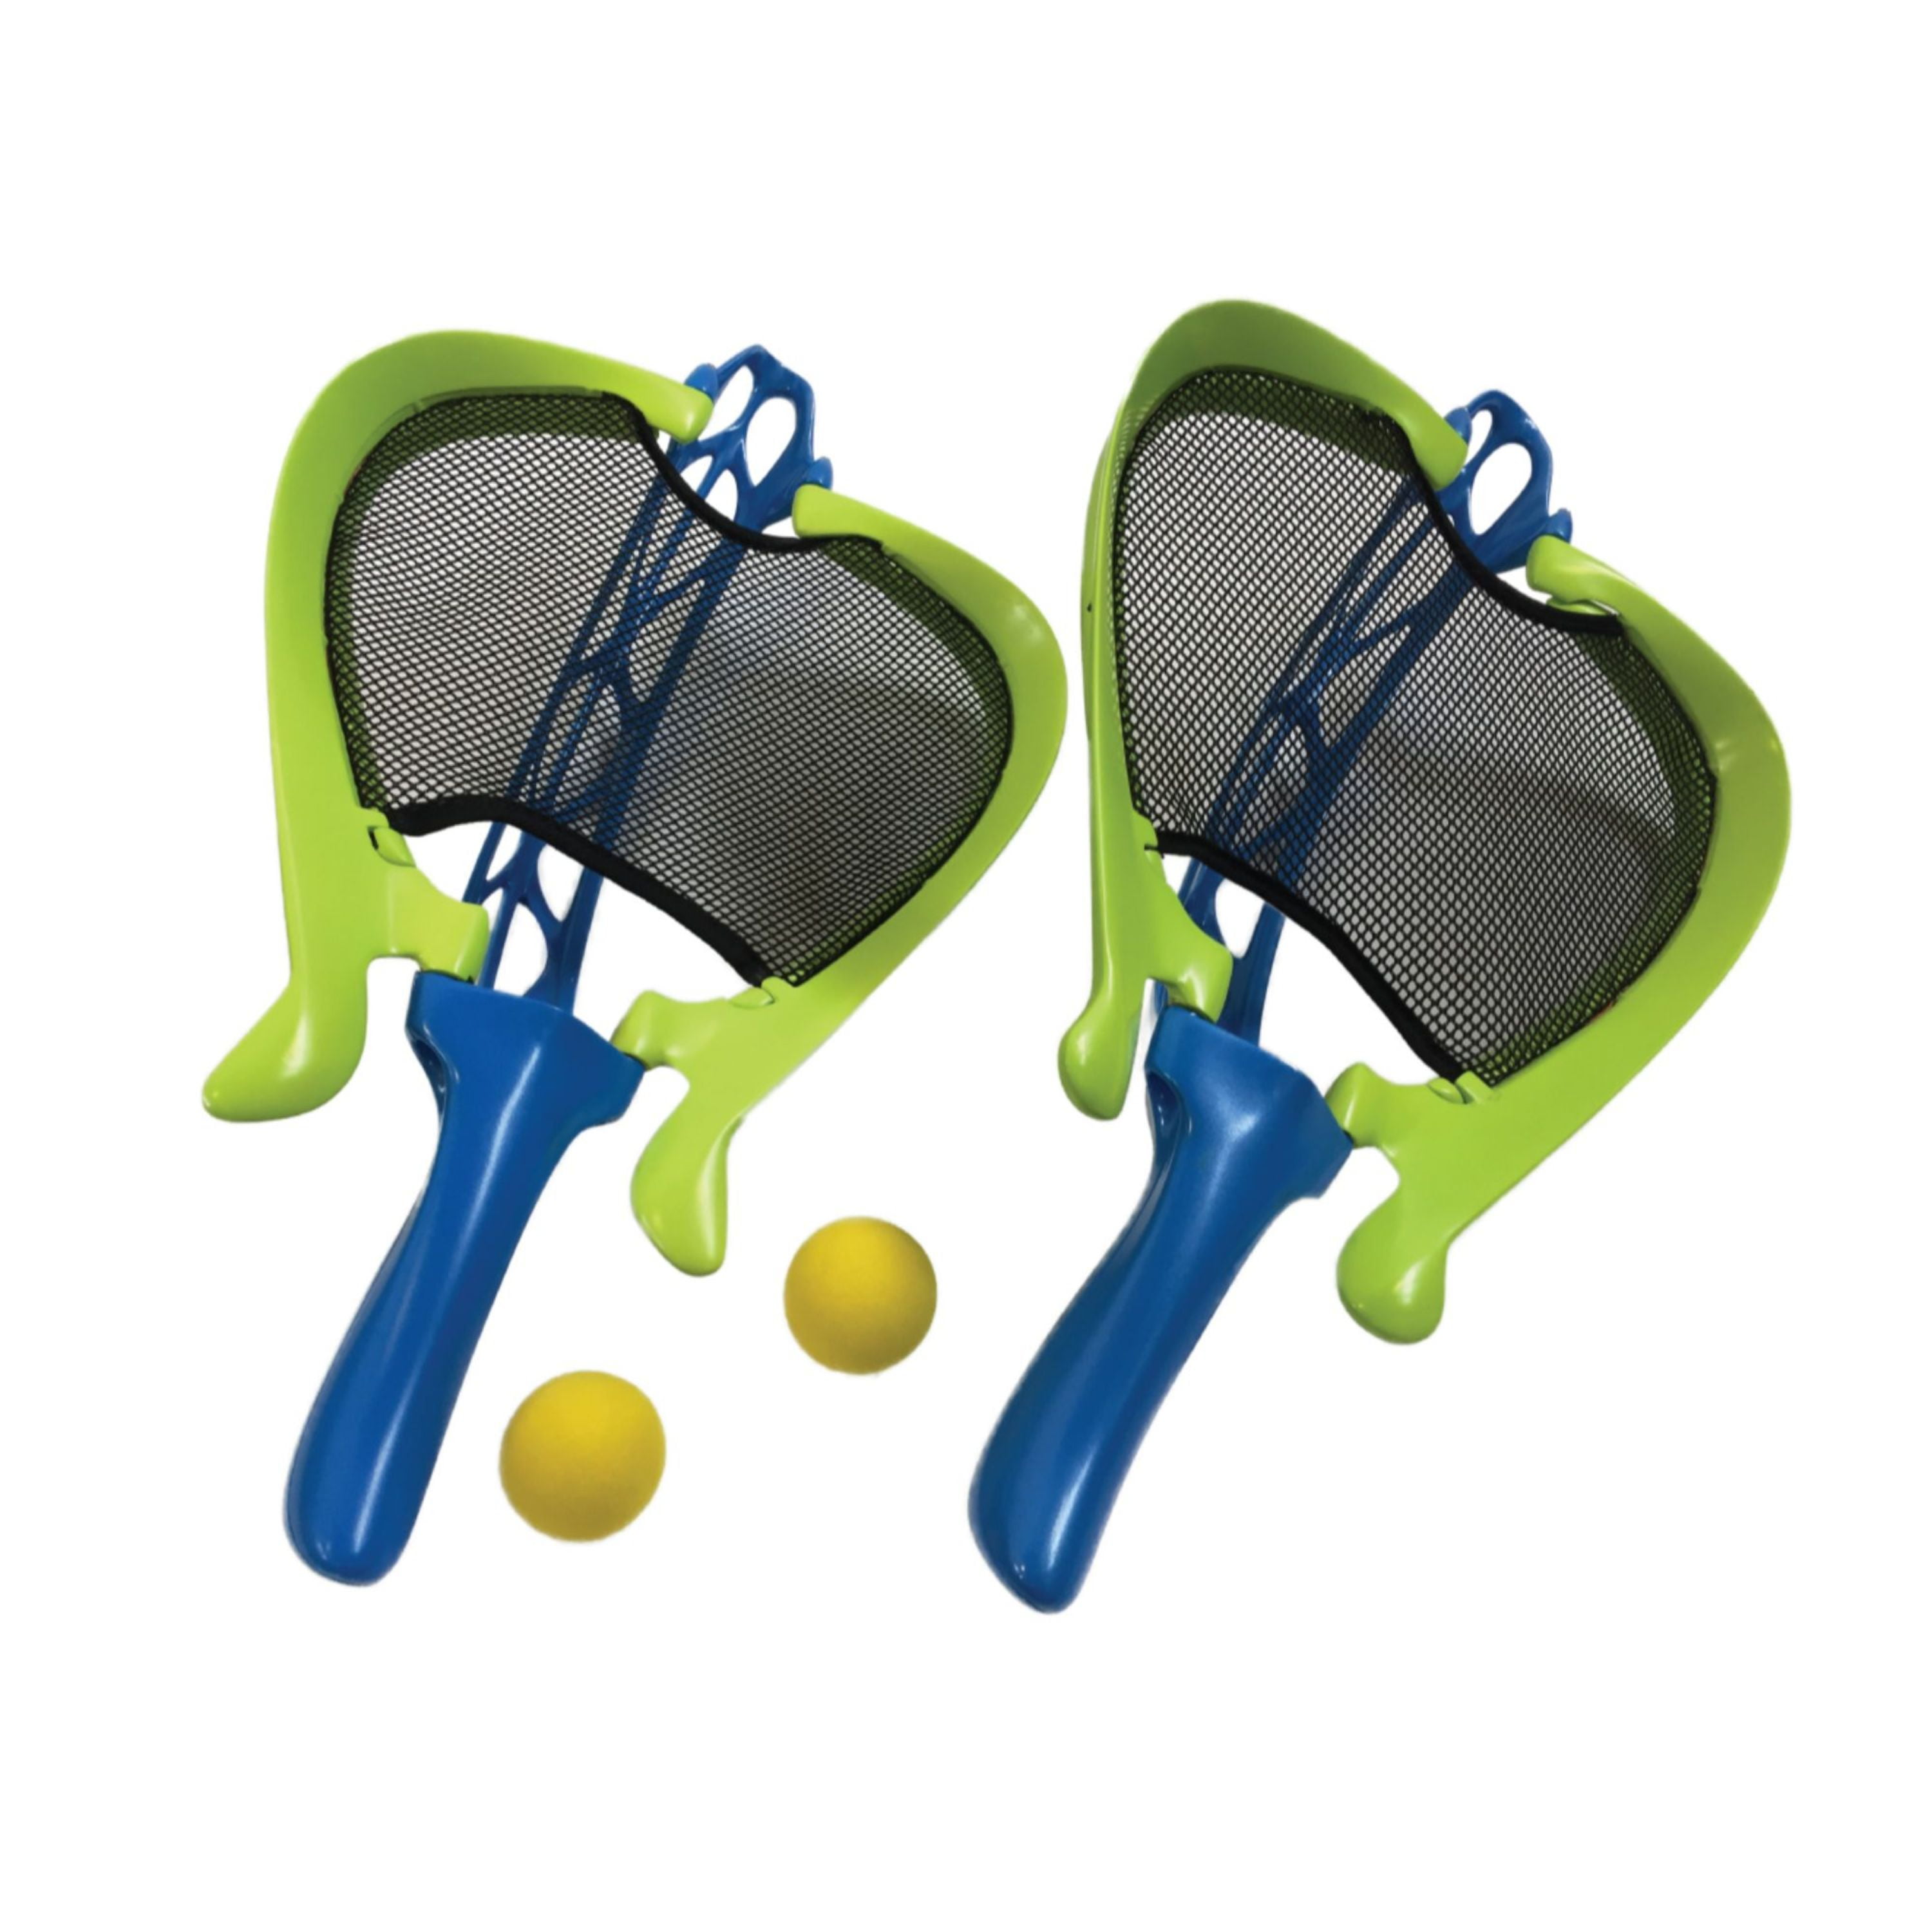 Throw And Catch Sport Games Tennis Set Holiday Giant Garden Game Outdoor Family 